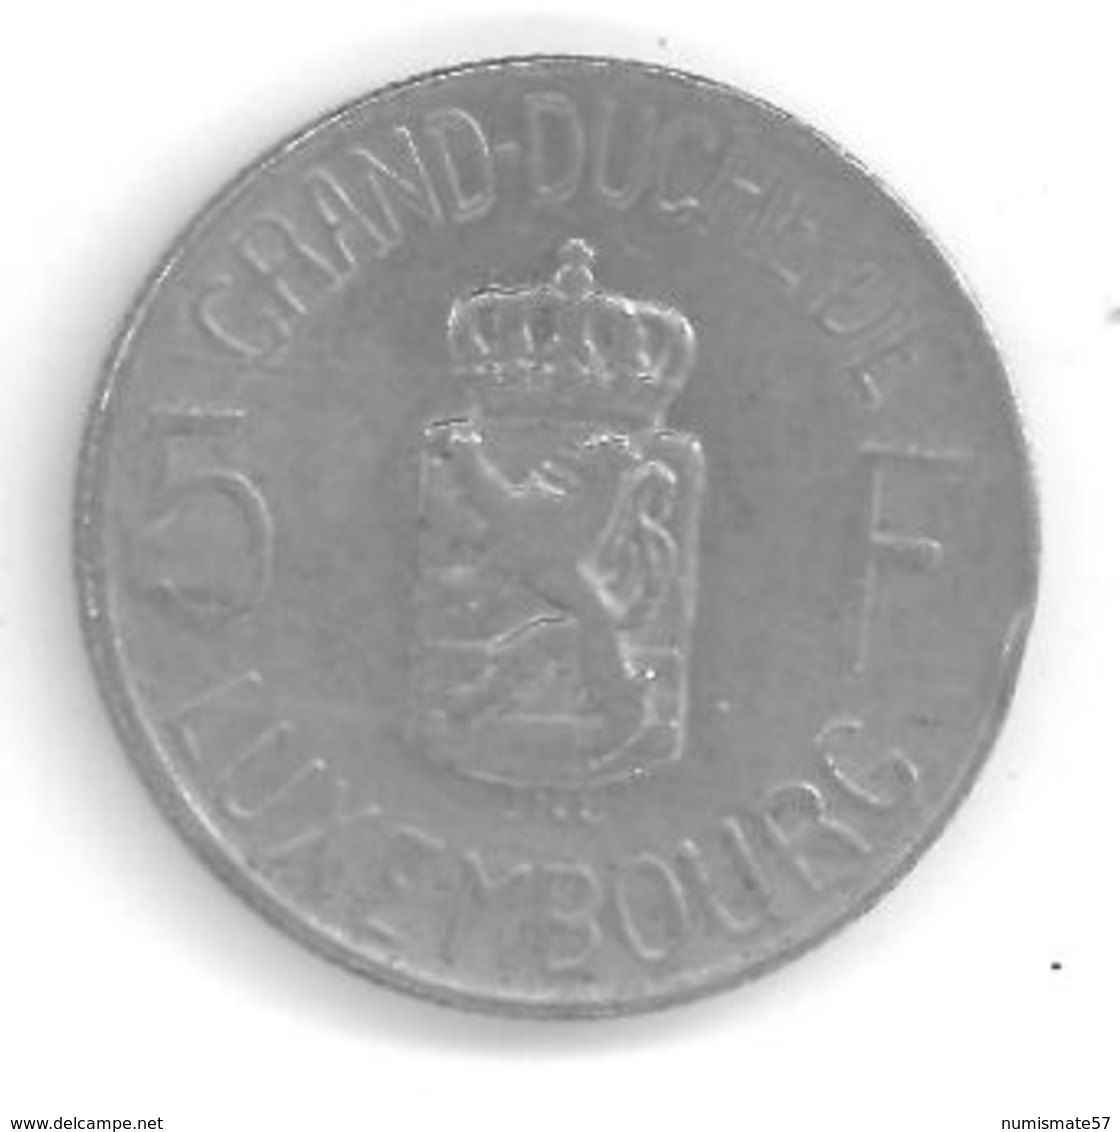 LUXEMBOURG - 5 FRANCS 1962 - Grande-Duchesse Charlotte - KM 51 - Luxembourg